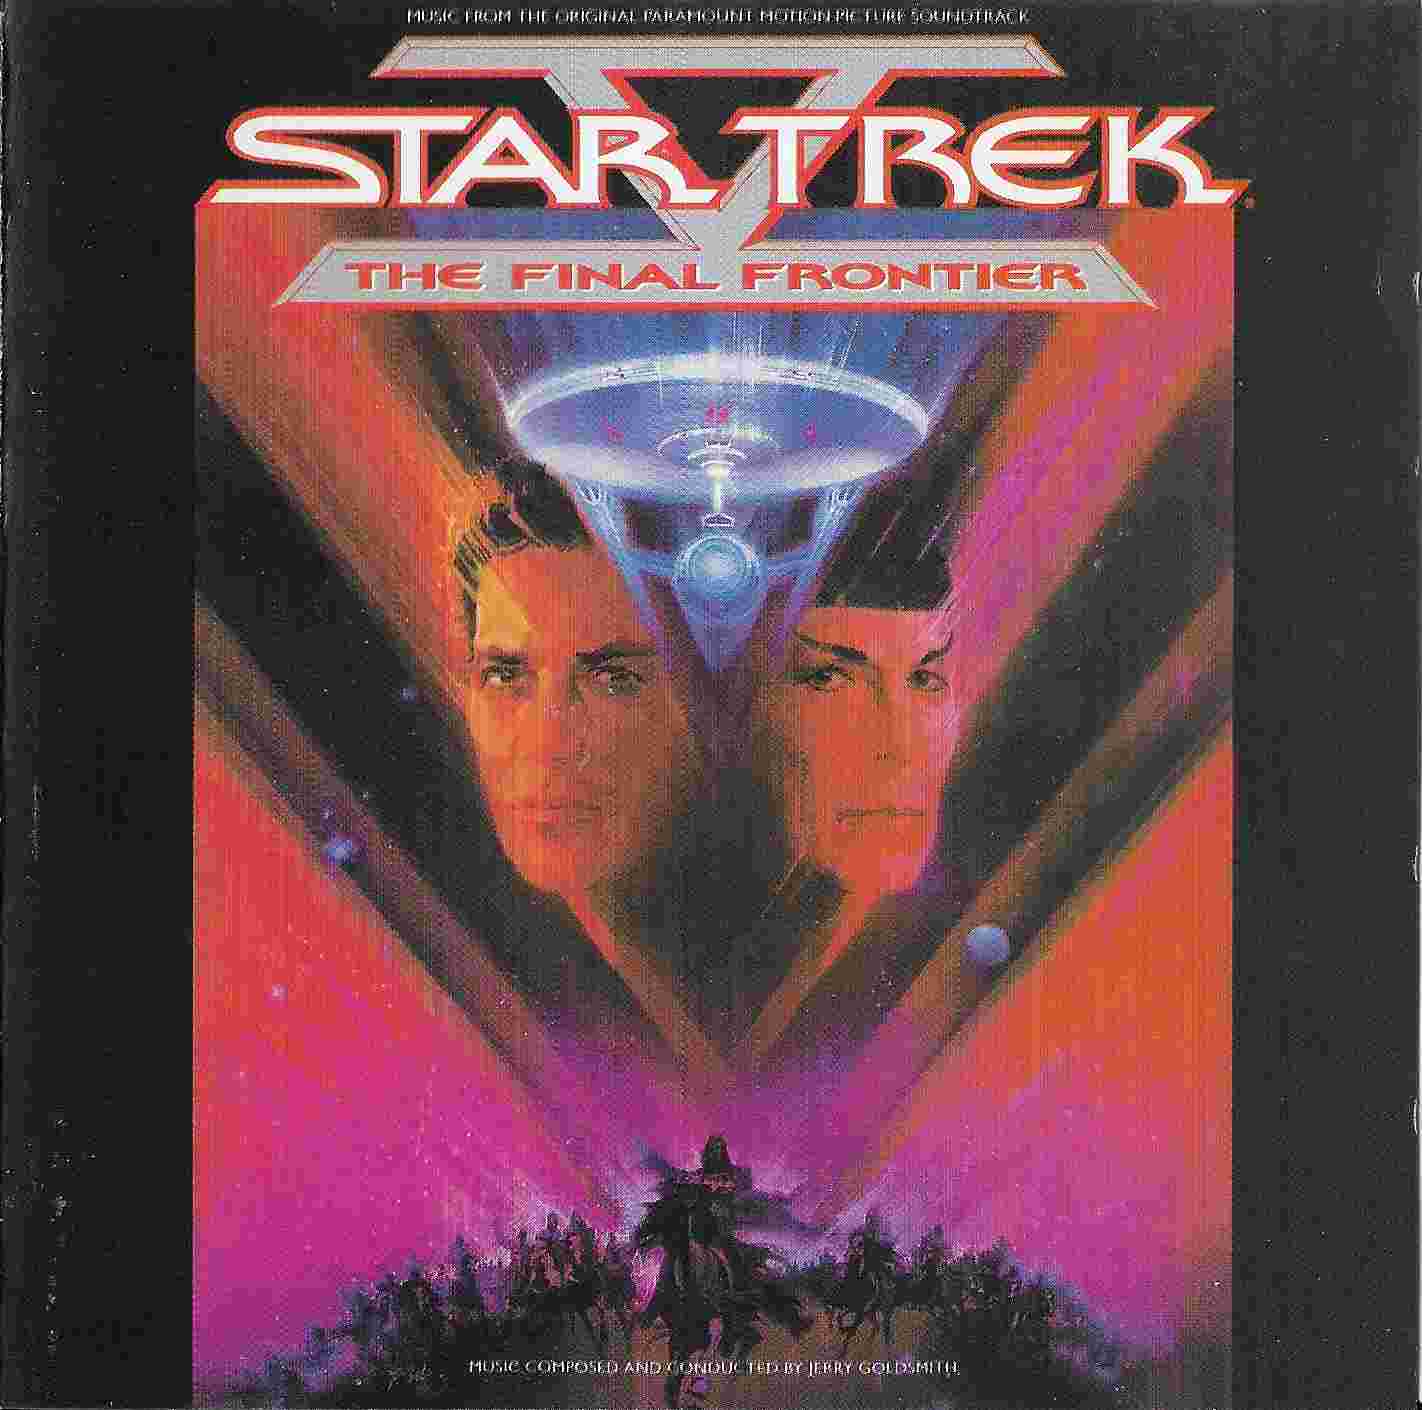 Picture of Star trek V by artist Jerry Goldsmith from the BBC cds - Records and Tapes library